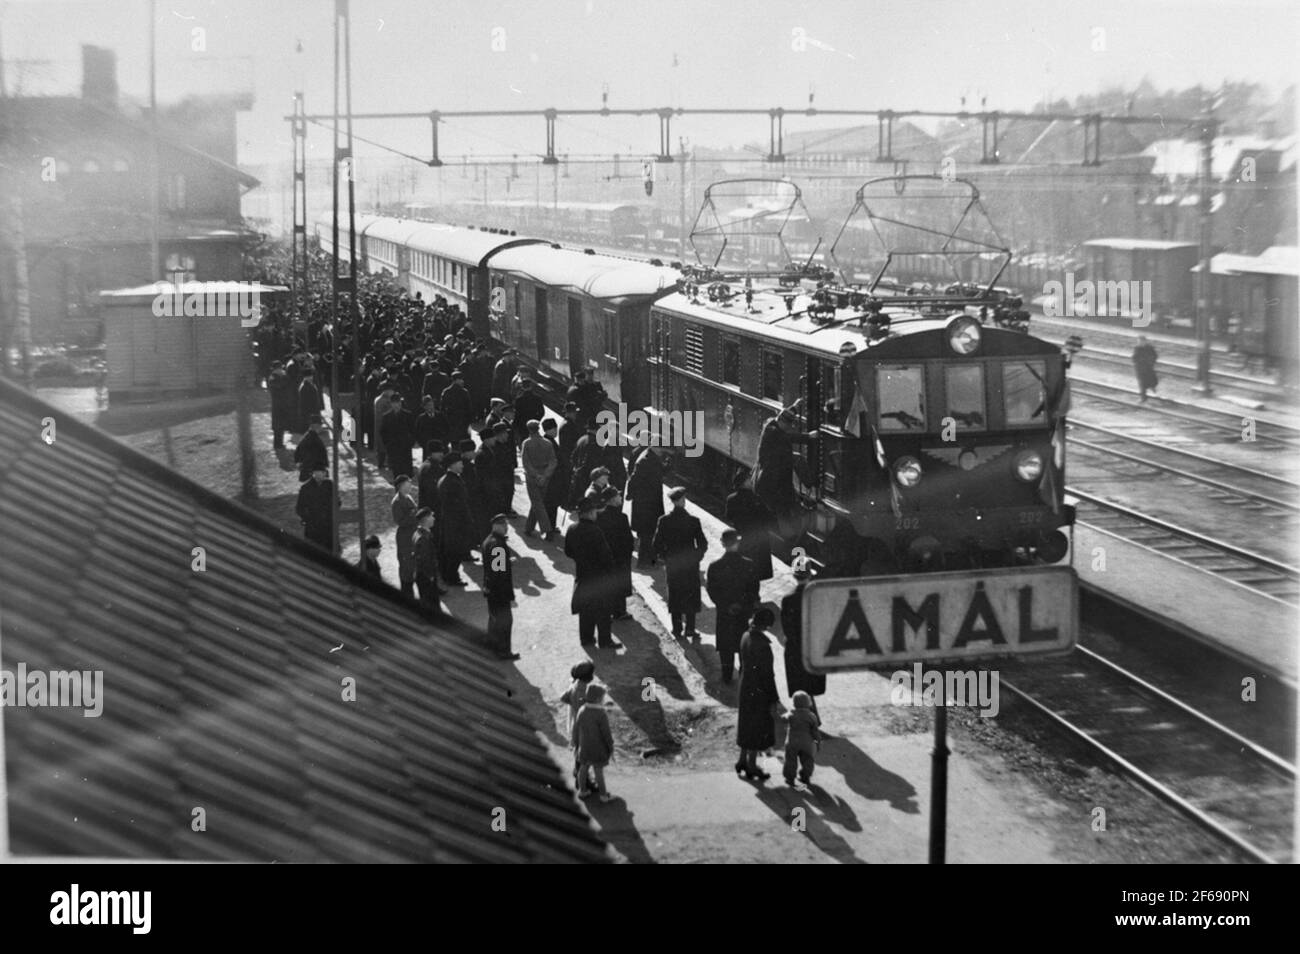 Åmår station was opened in 1879. Stationhouse was initially a two-storey brick building. In 1910 and the 1930s, O was modernized Statationshuset. The first electric train arrives at the station. SJ D 202. The locomotive was manufactured in 1933 by ASEA. Scrapped in 1979 in Vislanda. Stock Photo